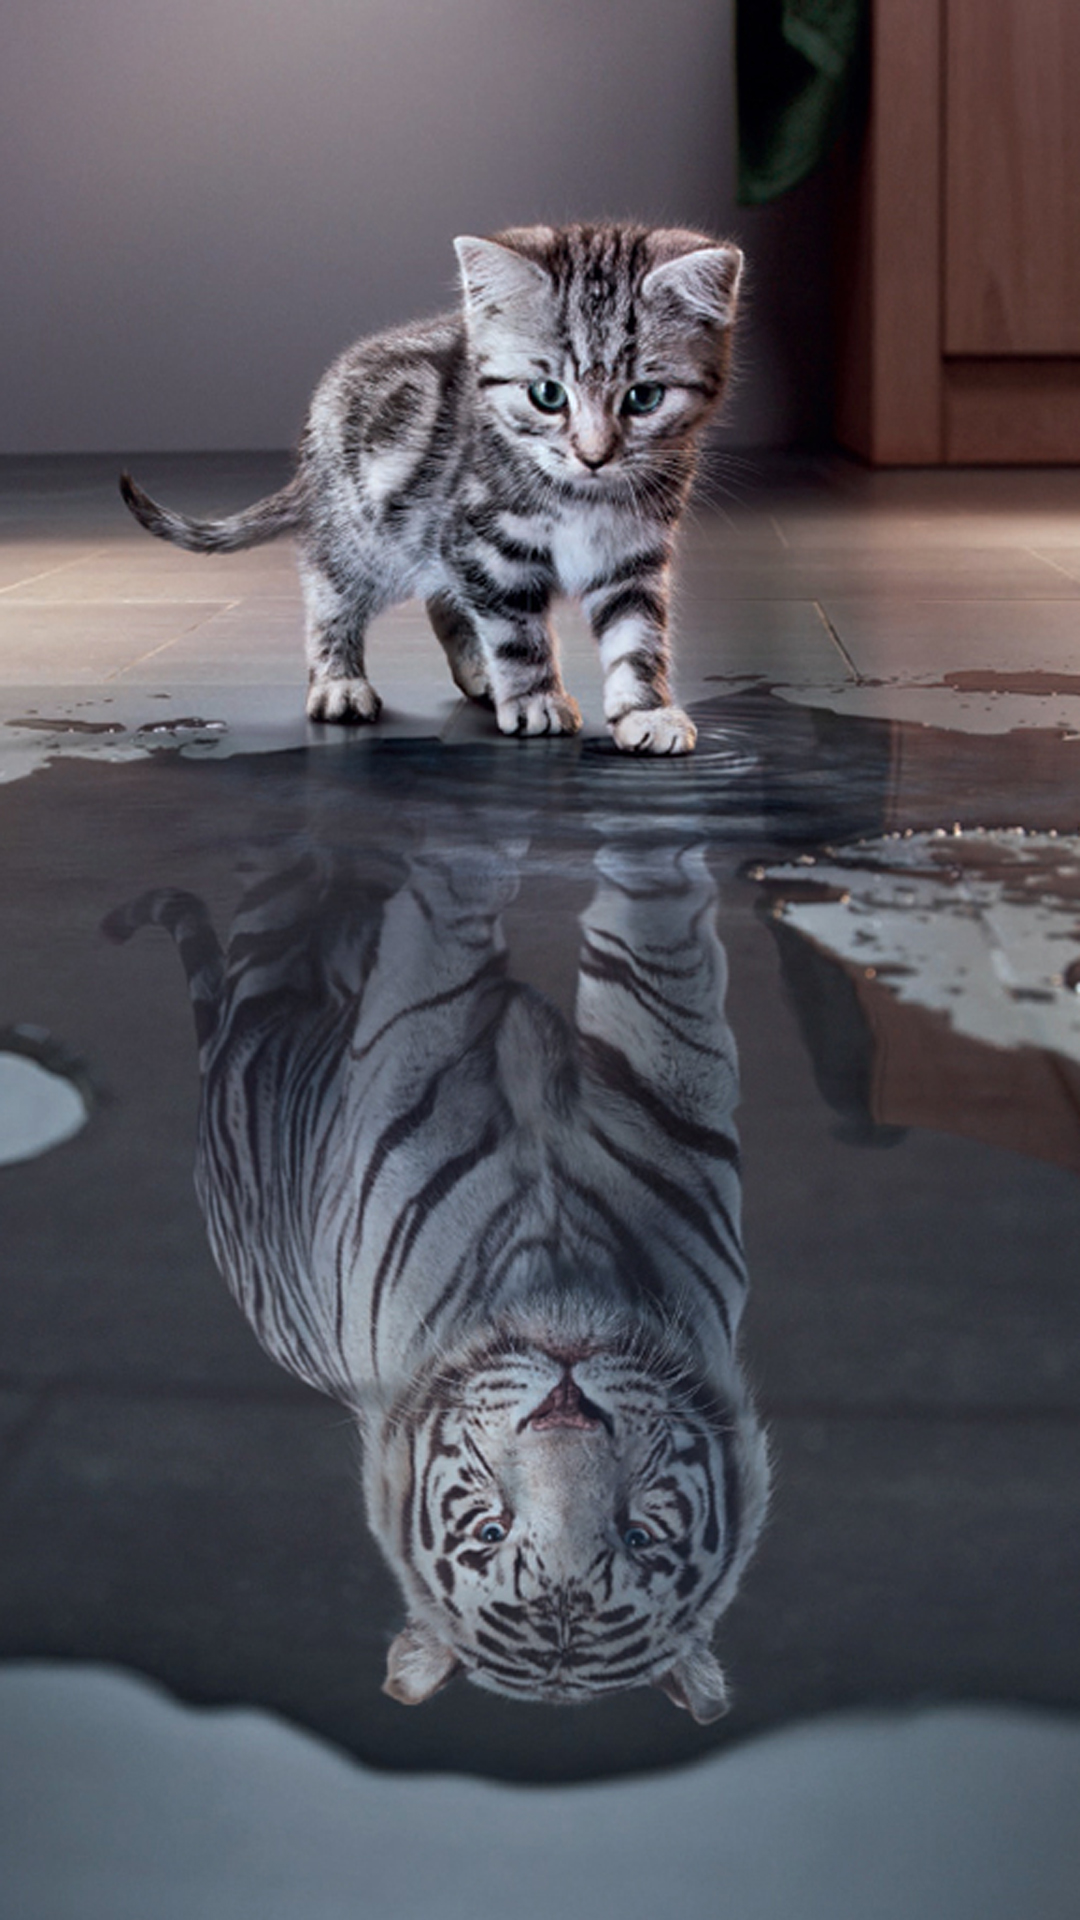 white tiger, kitten, animal, cat, reflection, puddle, cats